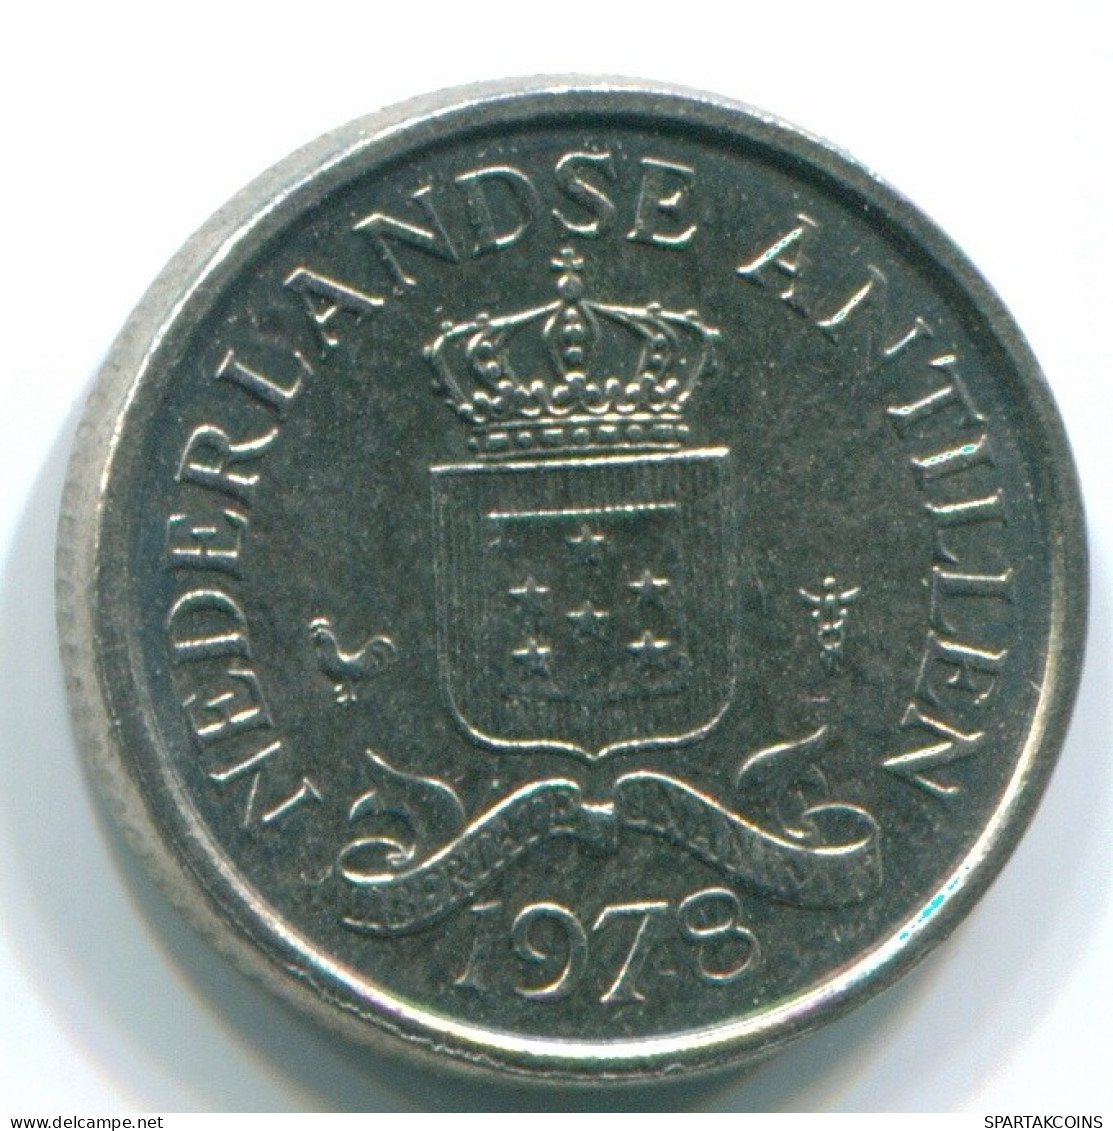 10 CENTS 1978 NETHERLANDS ANTILLES Nickel Colonial Coin #S13565.U.A - Netherlands Antilles